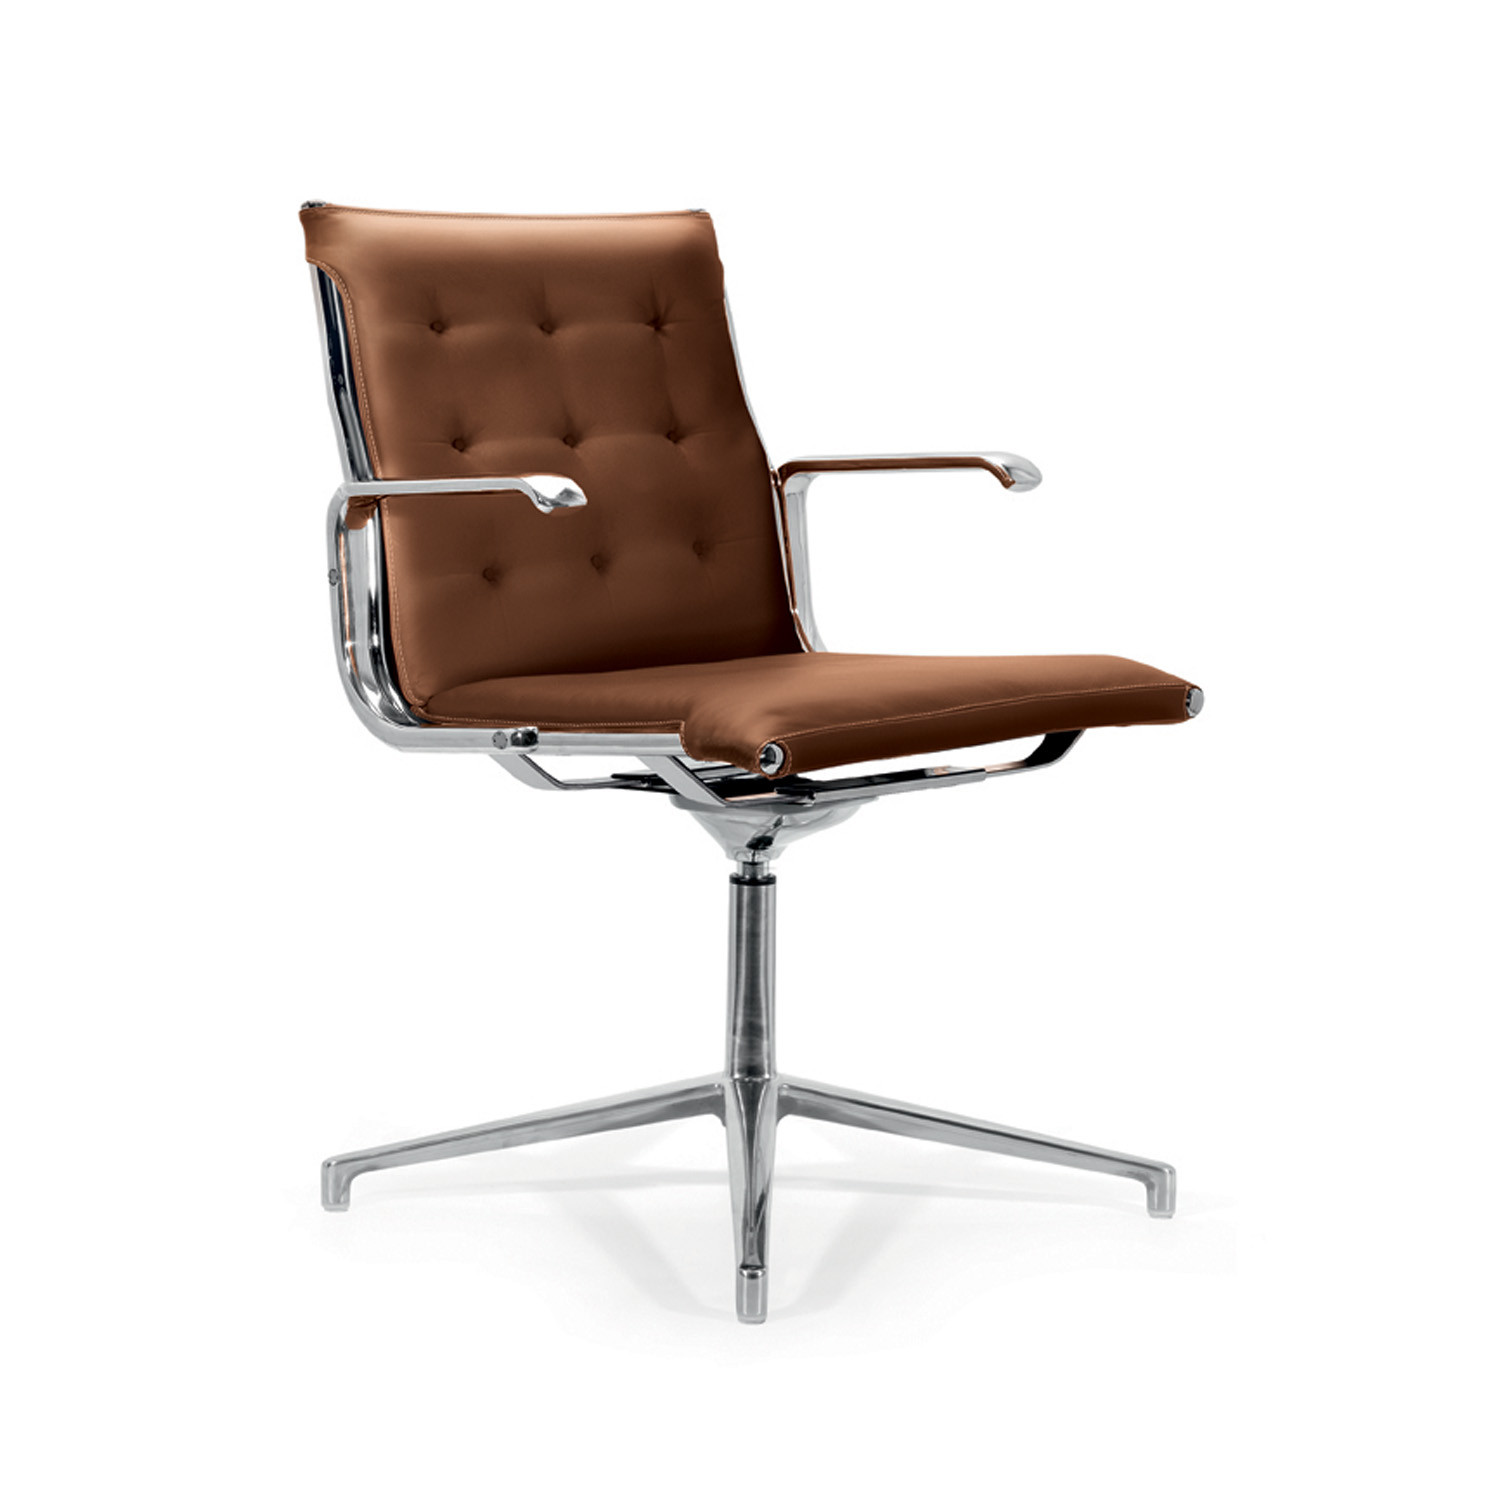 Taylord Leather Meeting Chairs